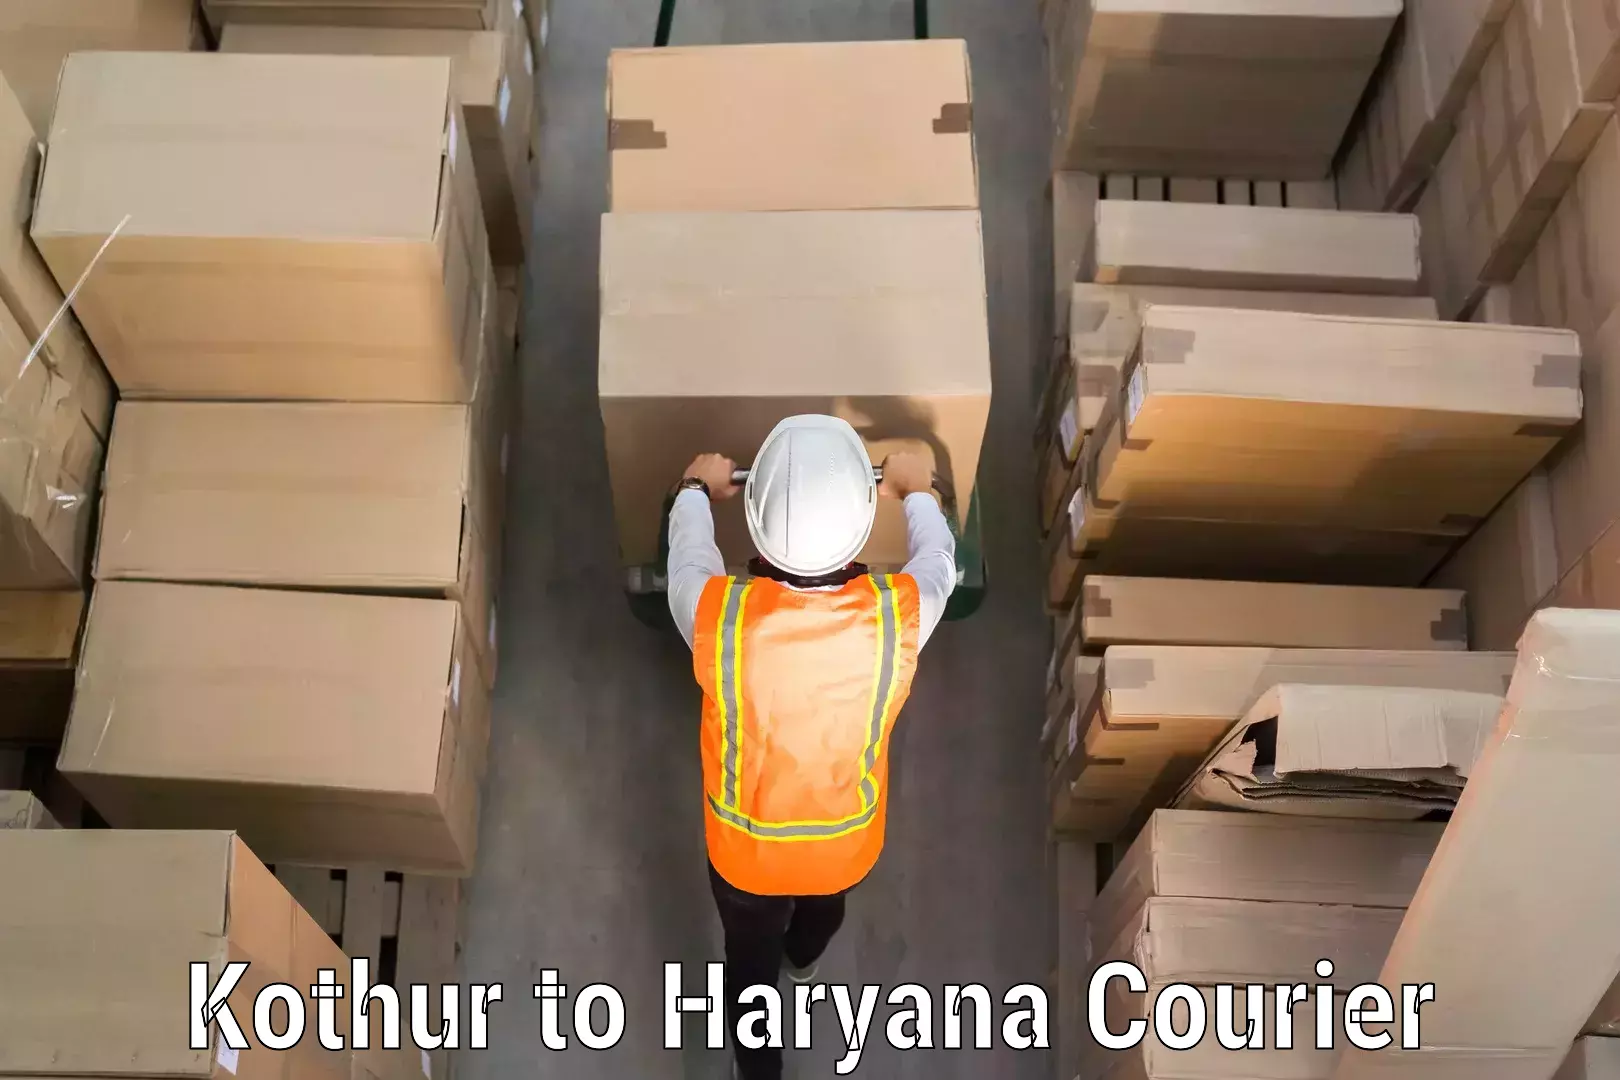 Luggage storage and delivery Kothur to NCR Haryana